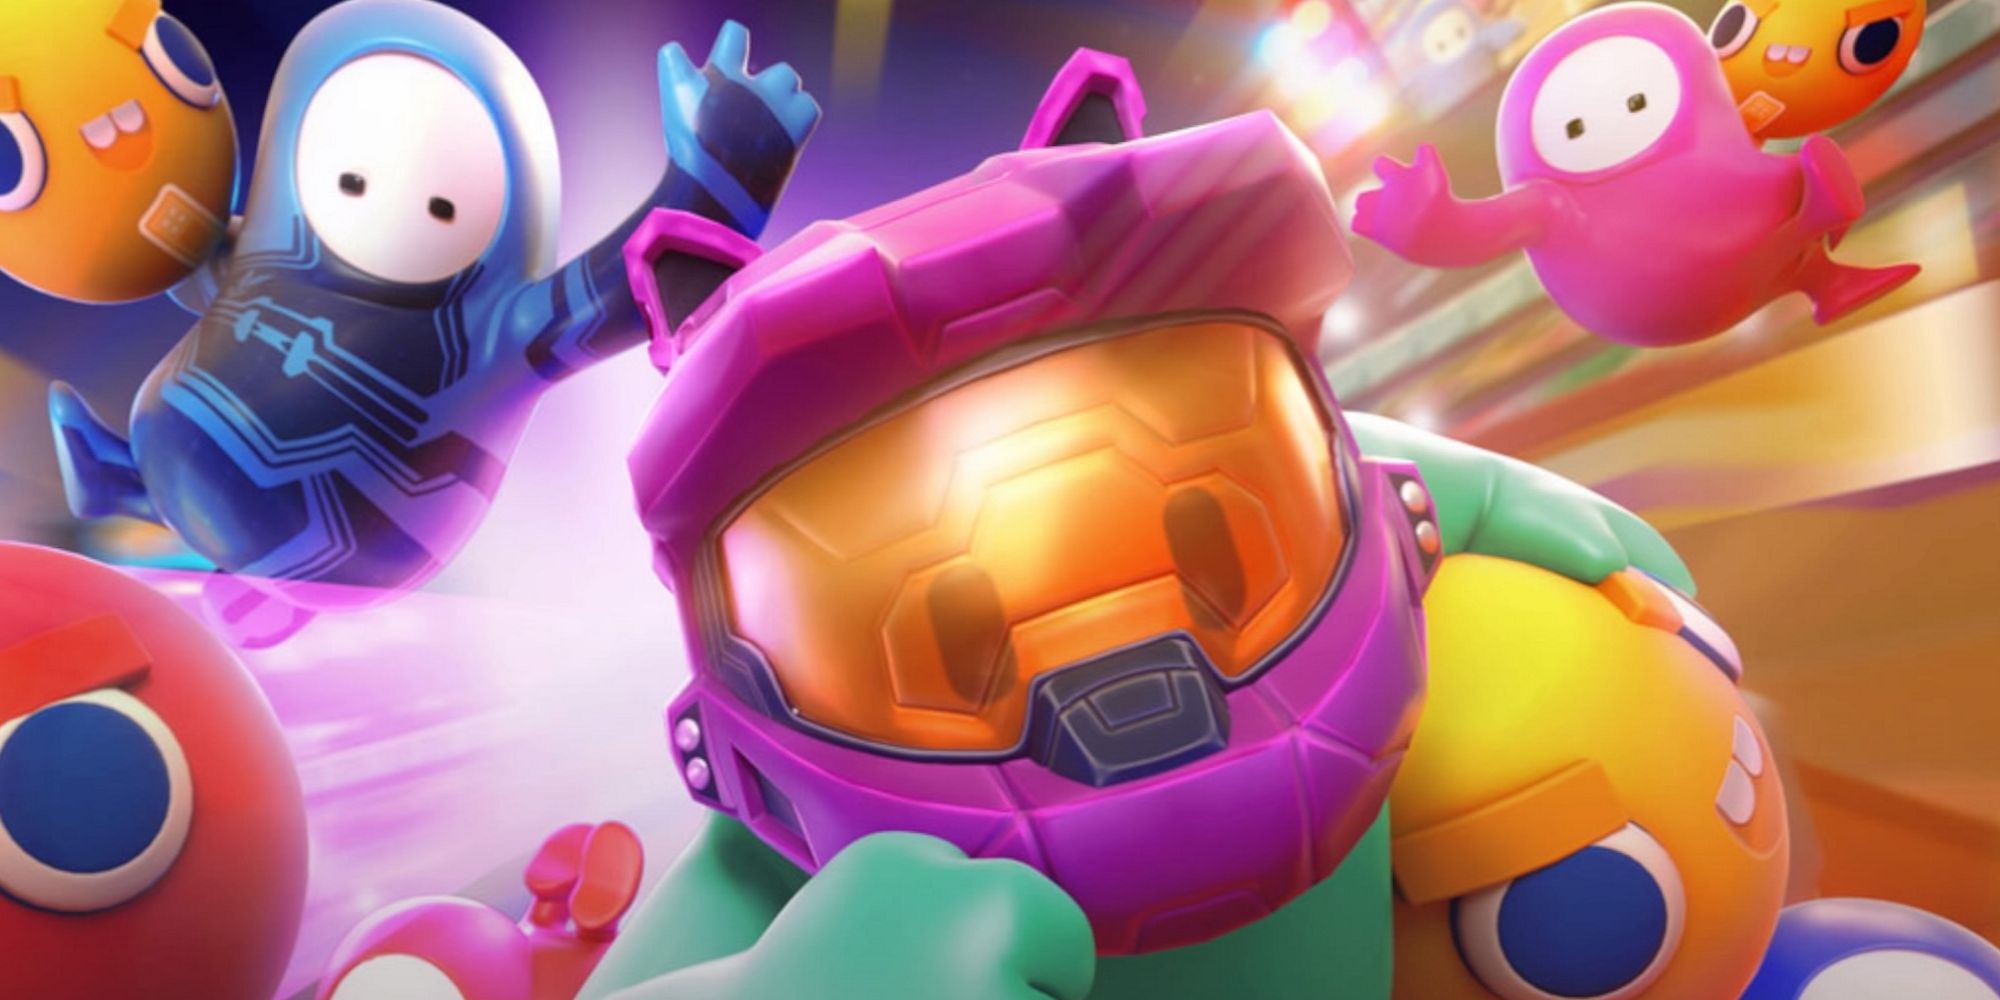 A Fall Guy wearing the Purrfect Helmet carrying a Blast Ball, surrounded by others doing the same